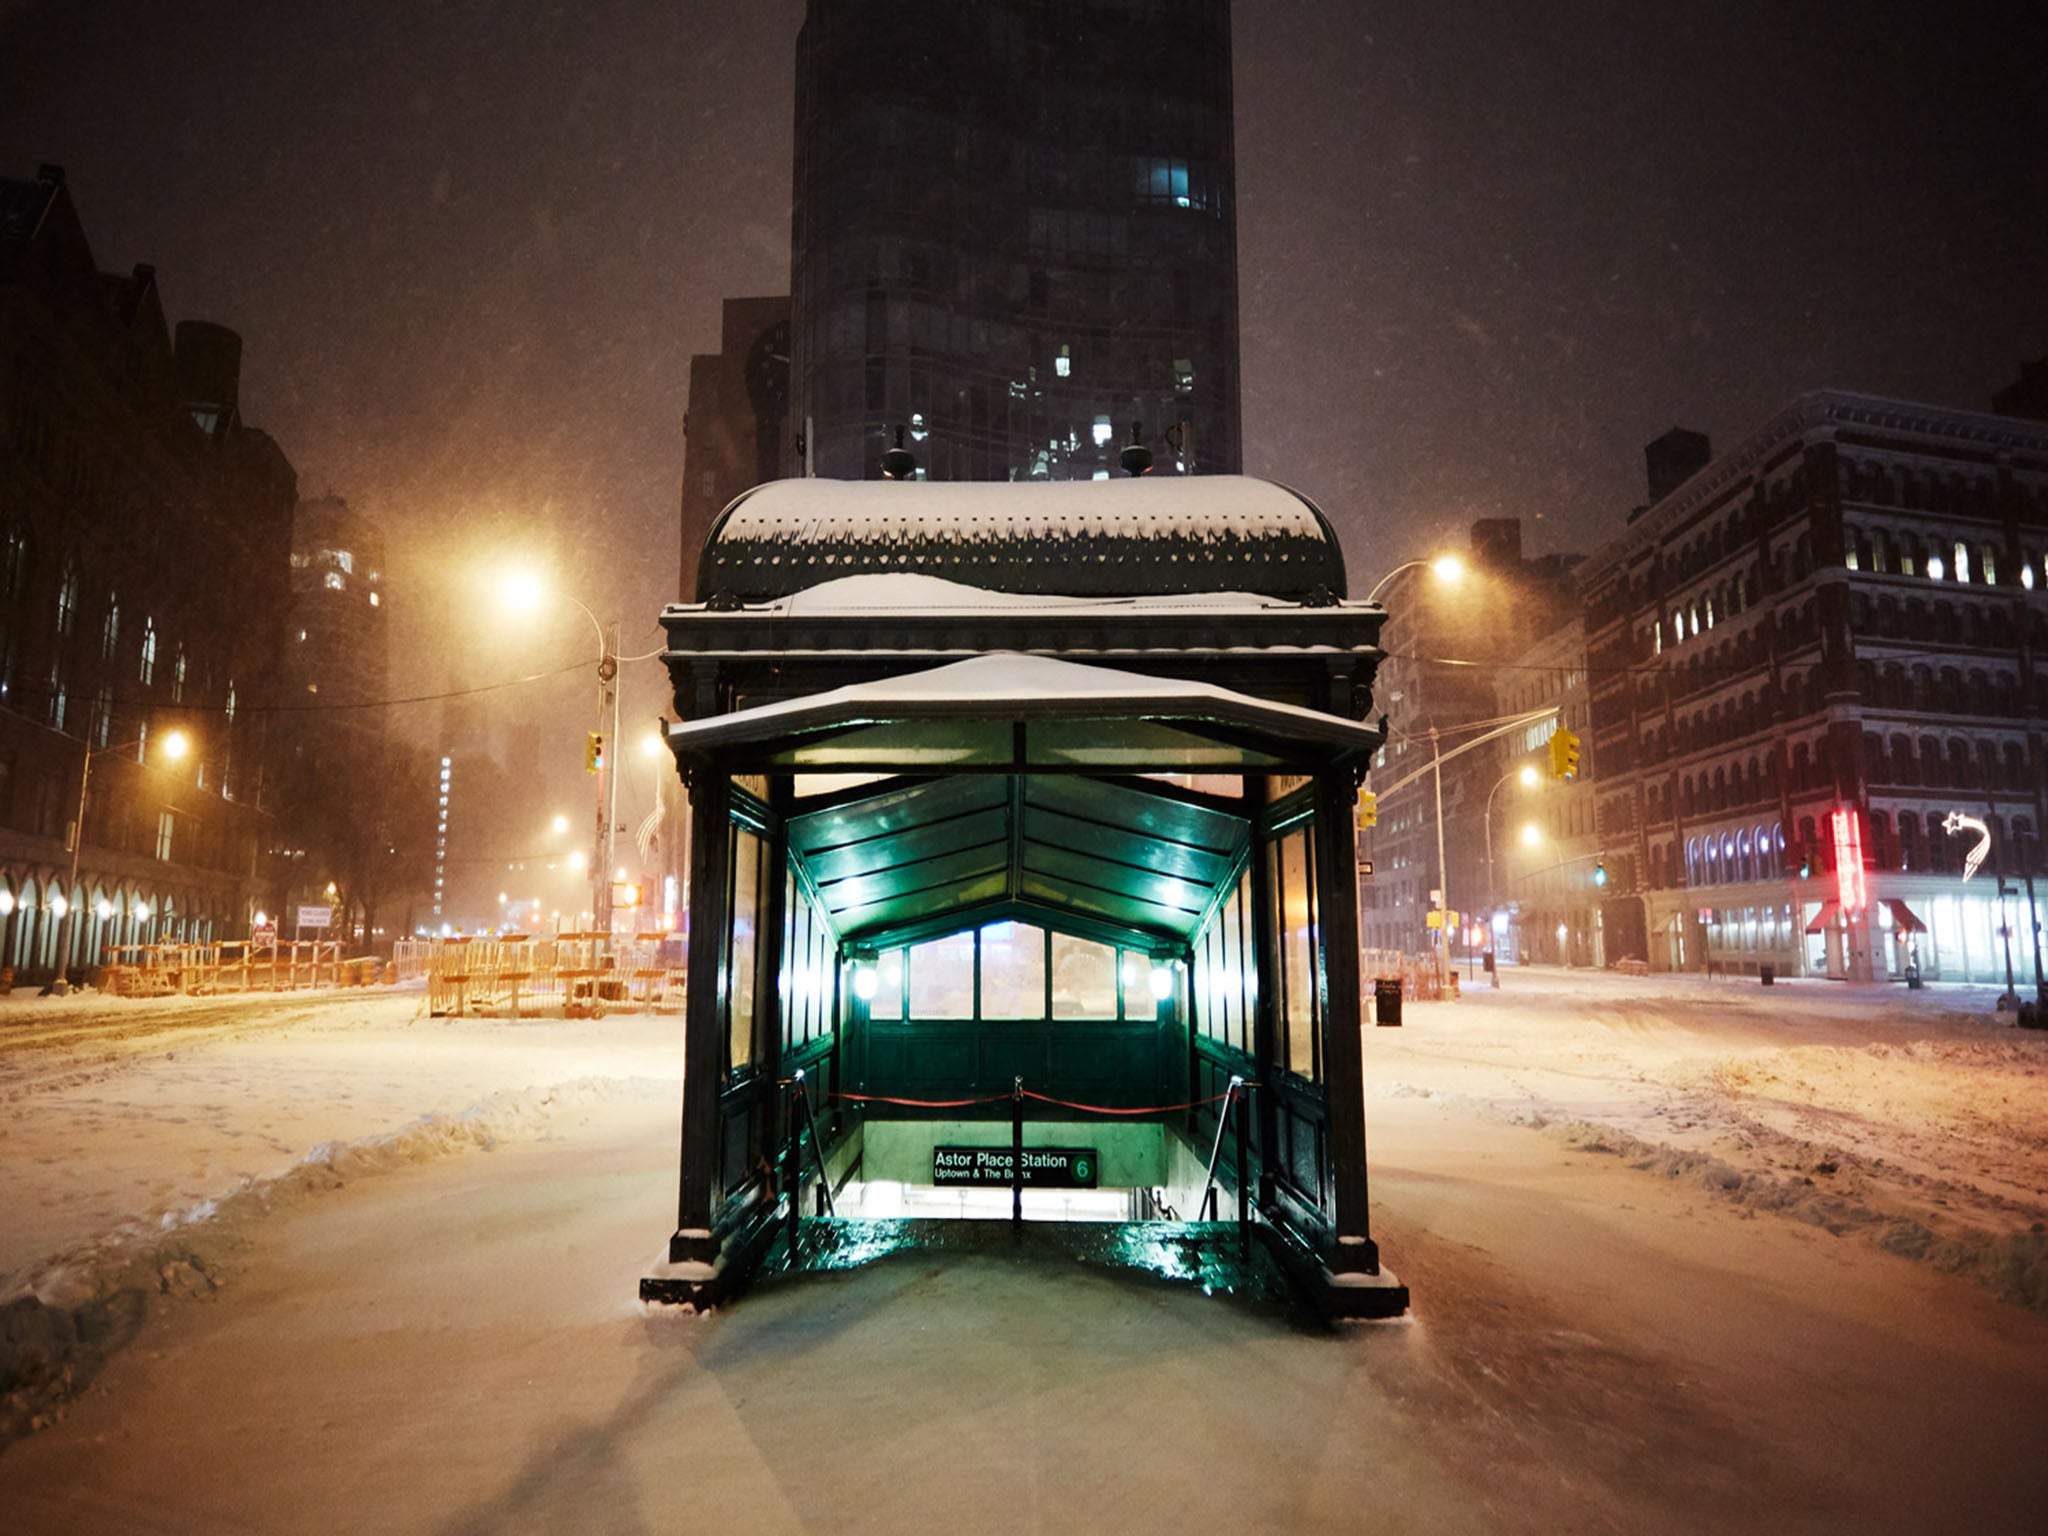 An approaching blizzard forced a near-total shutdown of New York on Monday night. Jaka Vinsek.